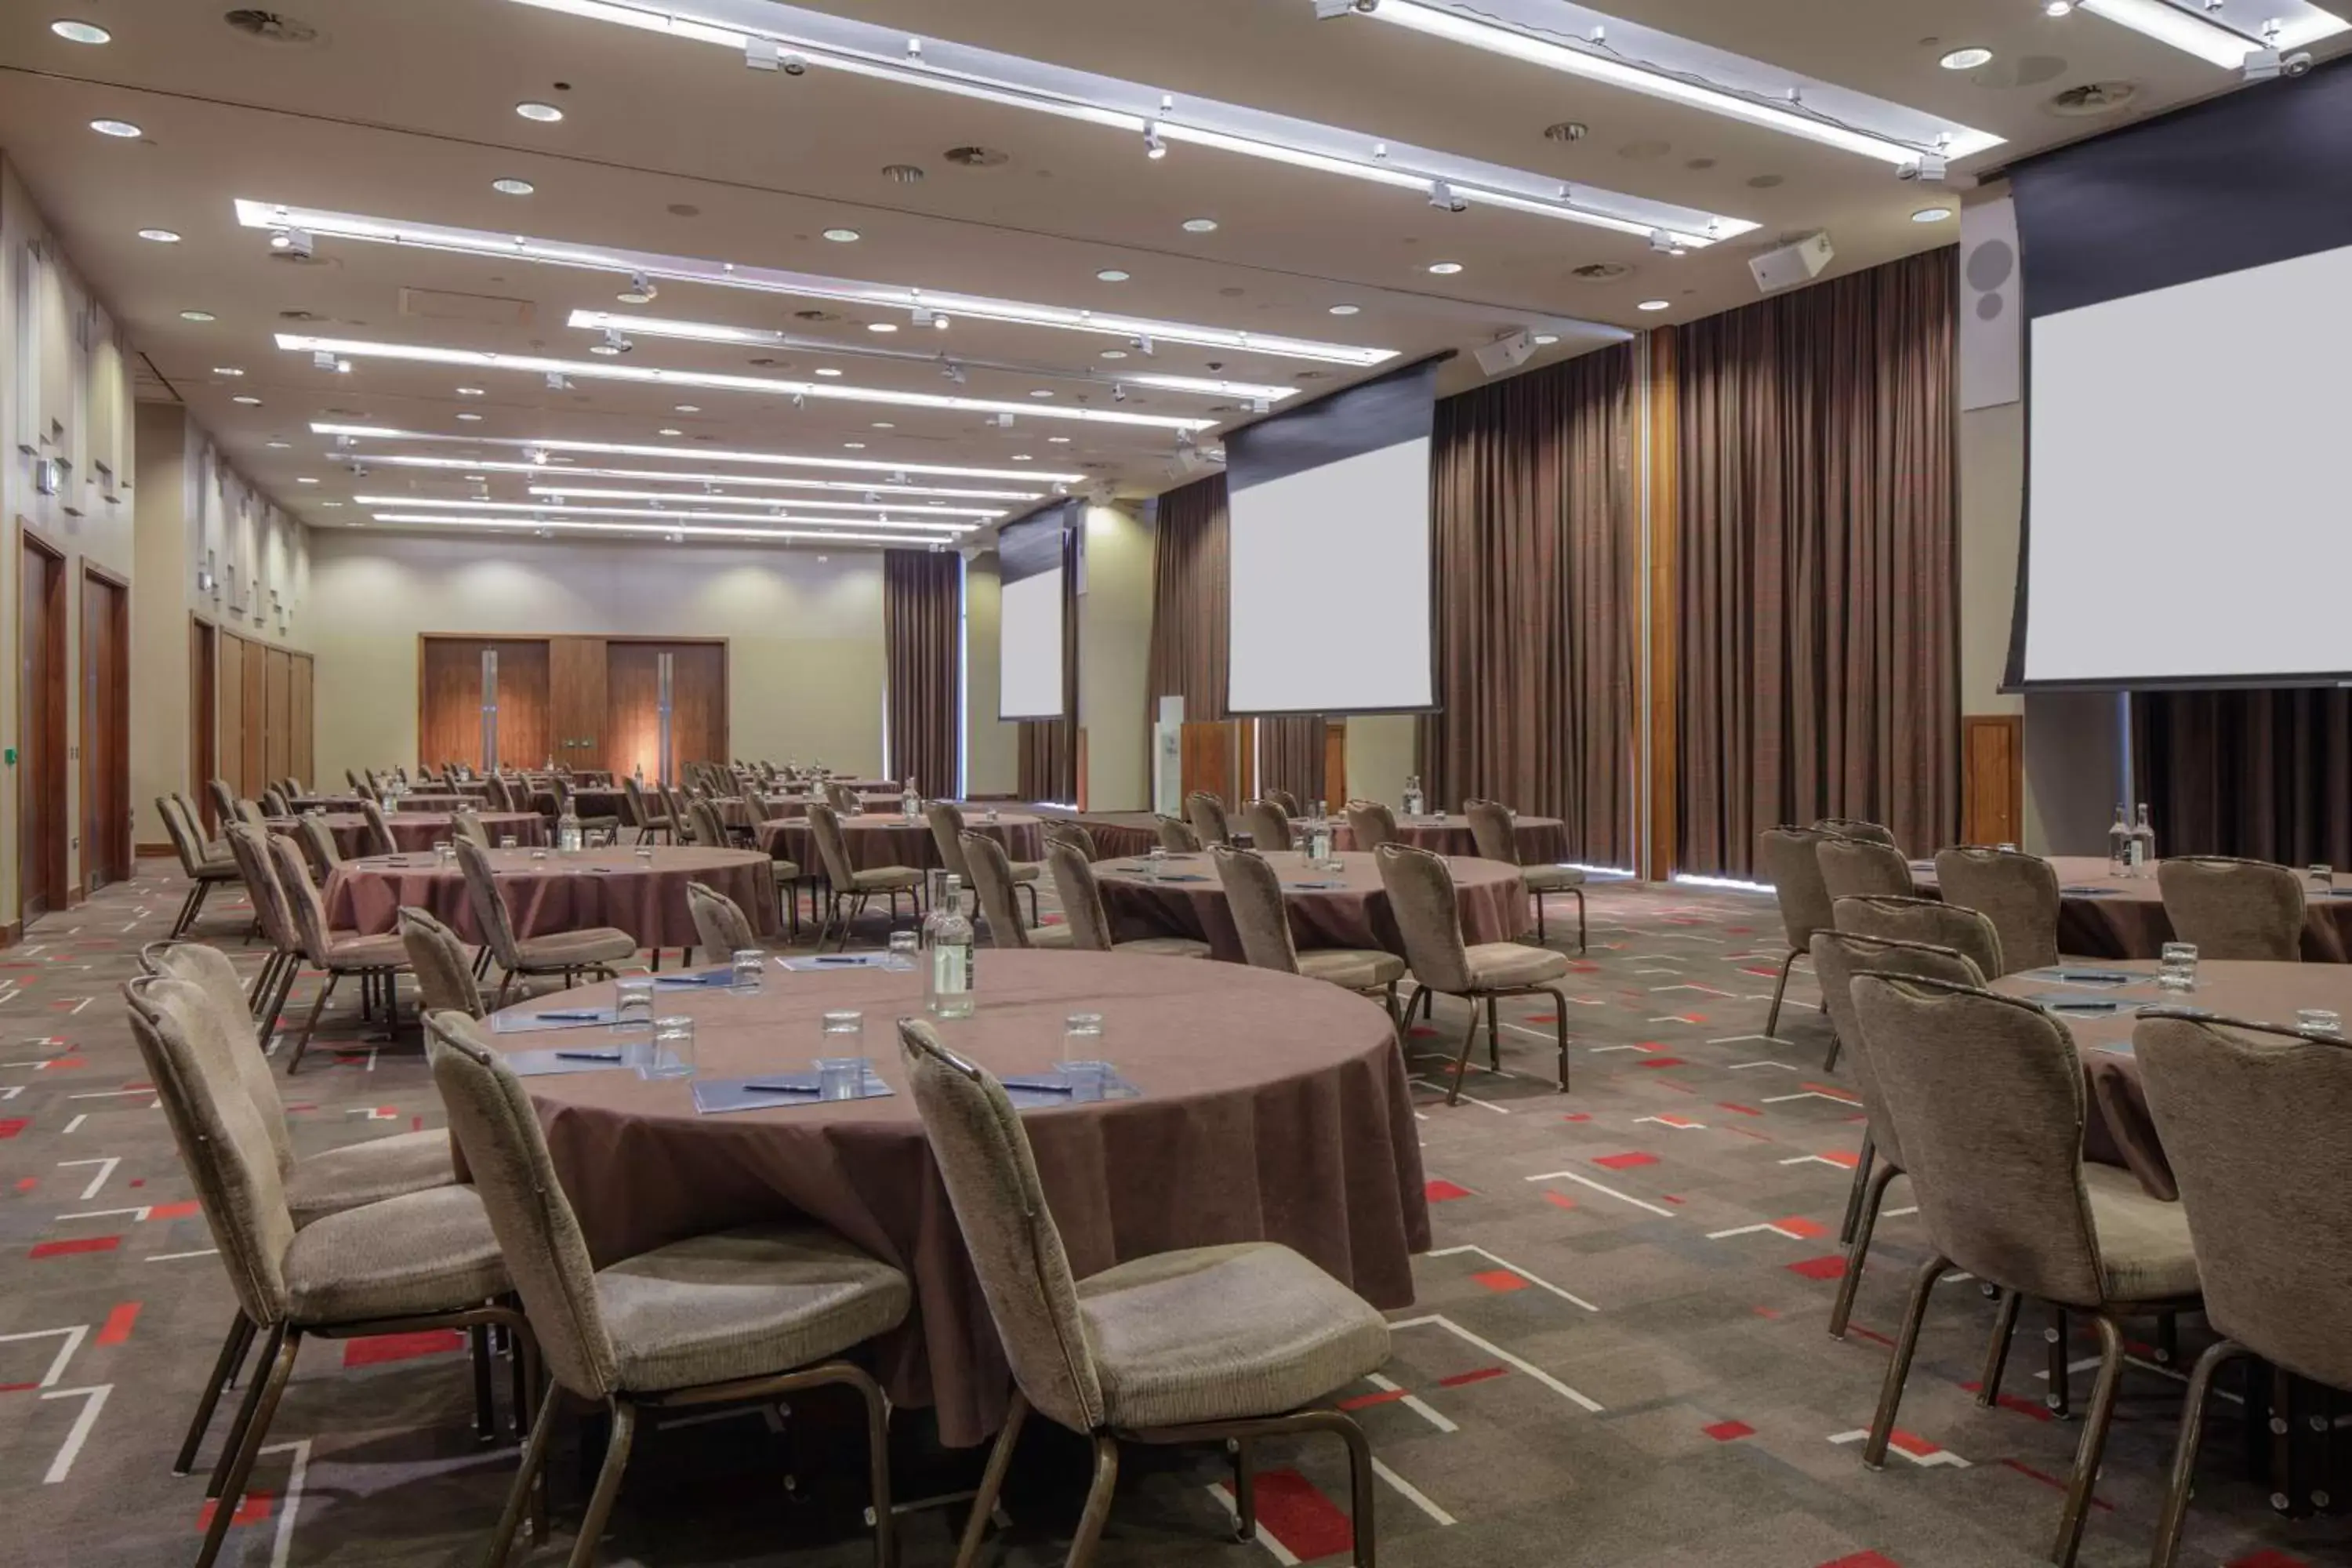 Meeting/conference room in Hilton Liverpool City Centre